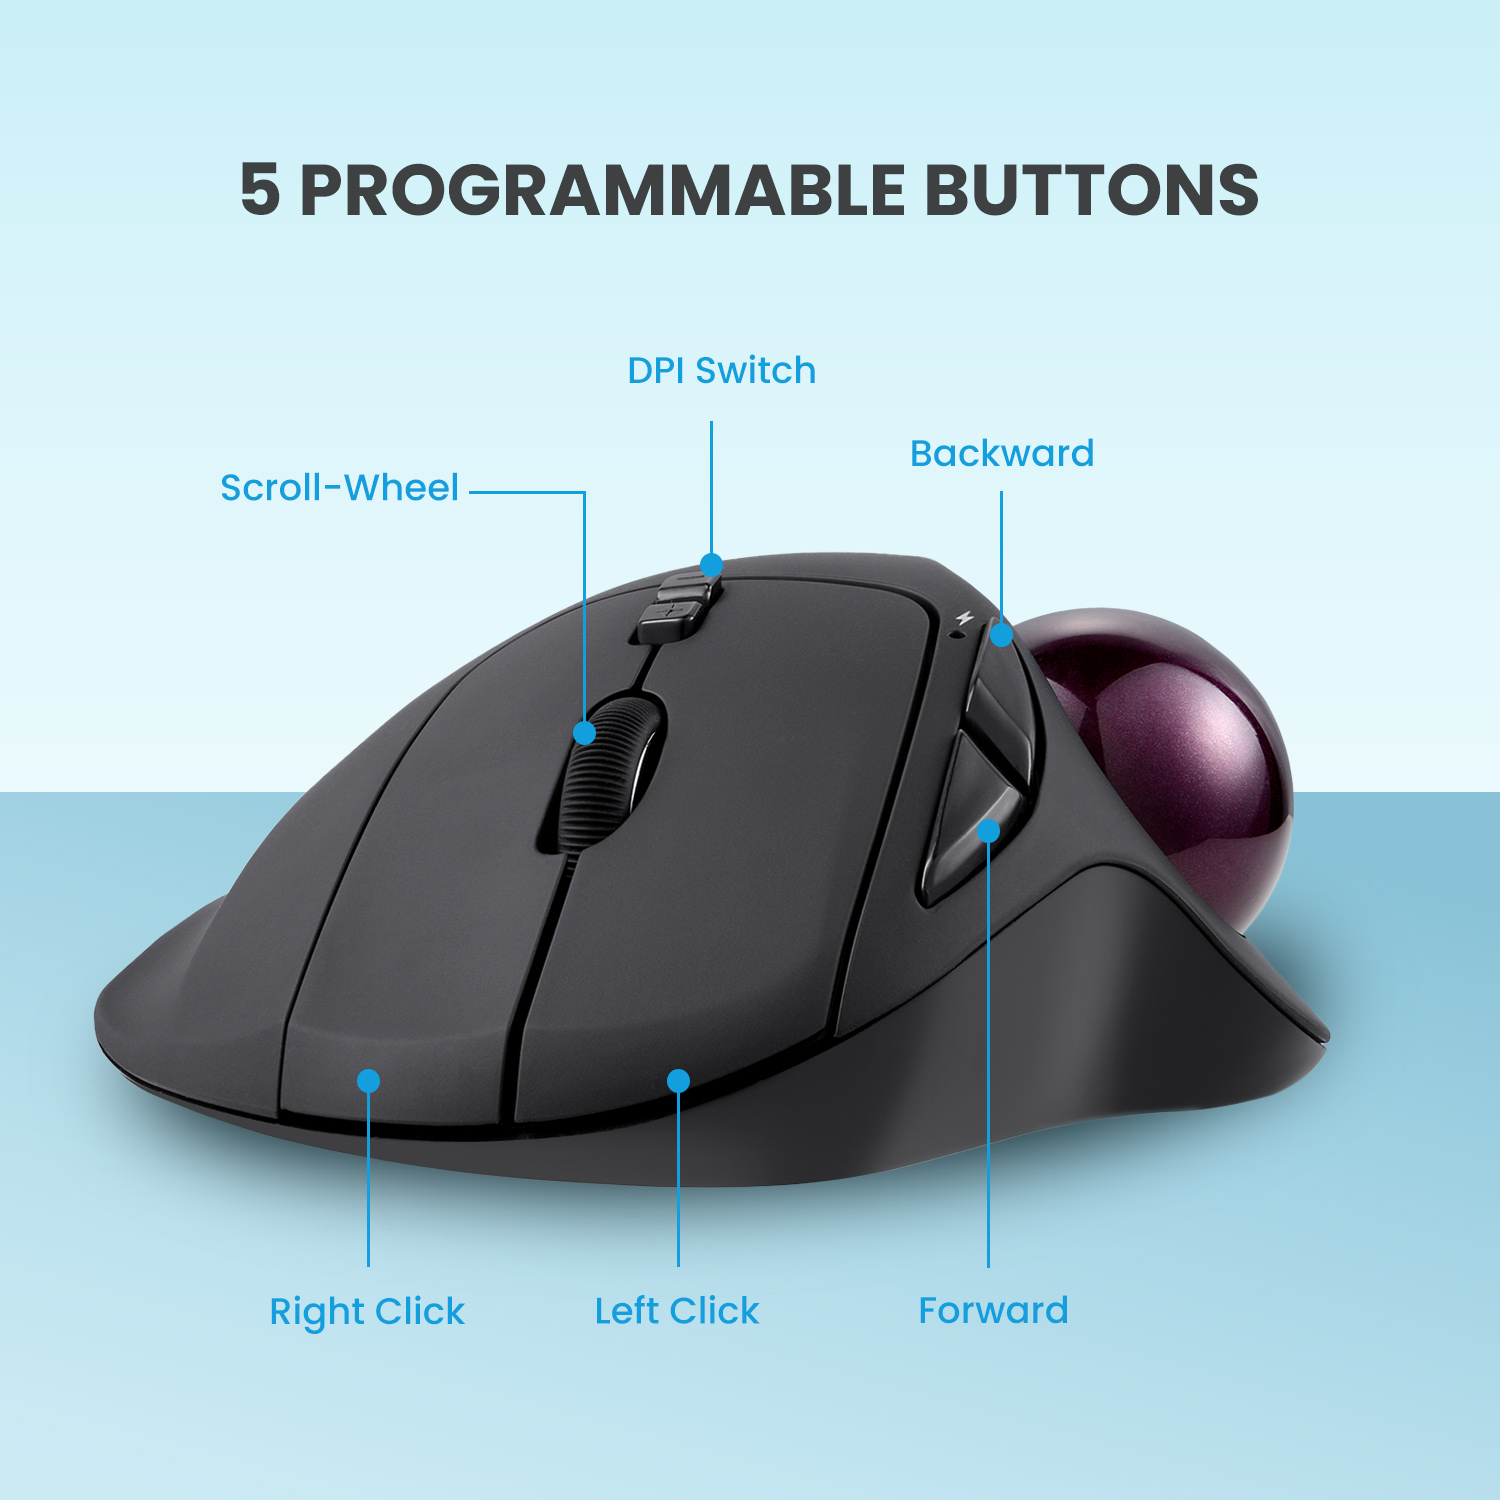  PROGRAMMABLE BUTTONS